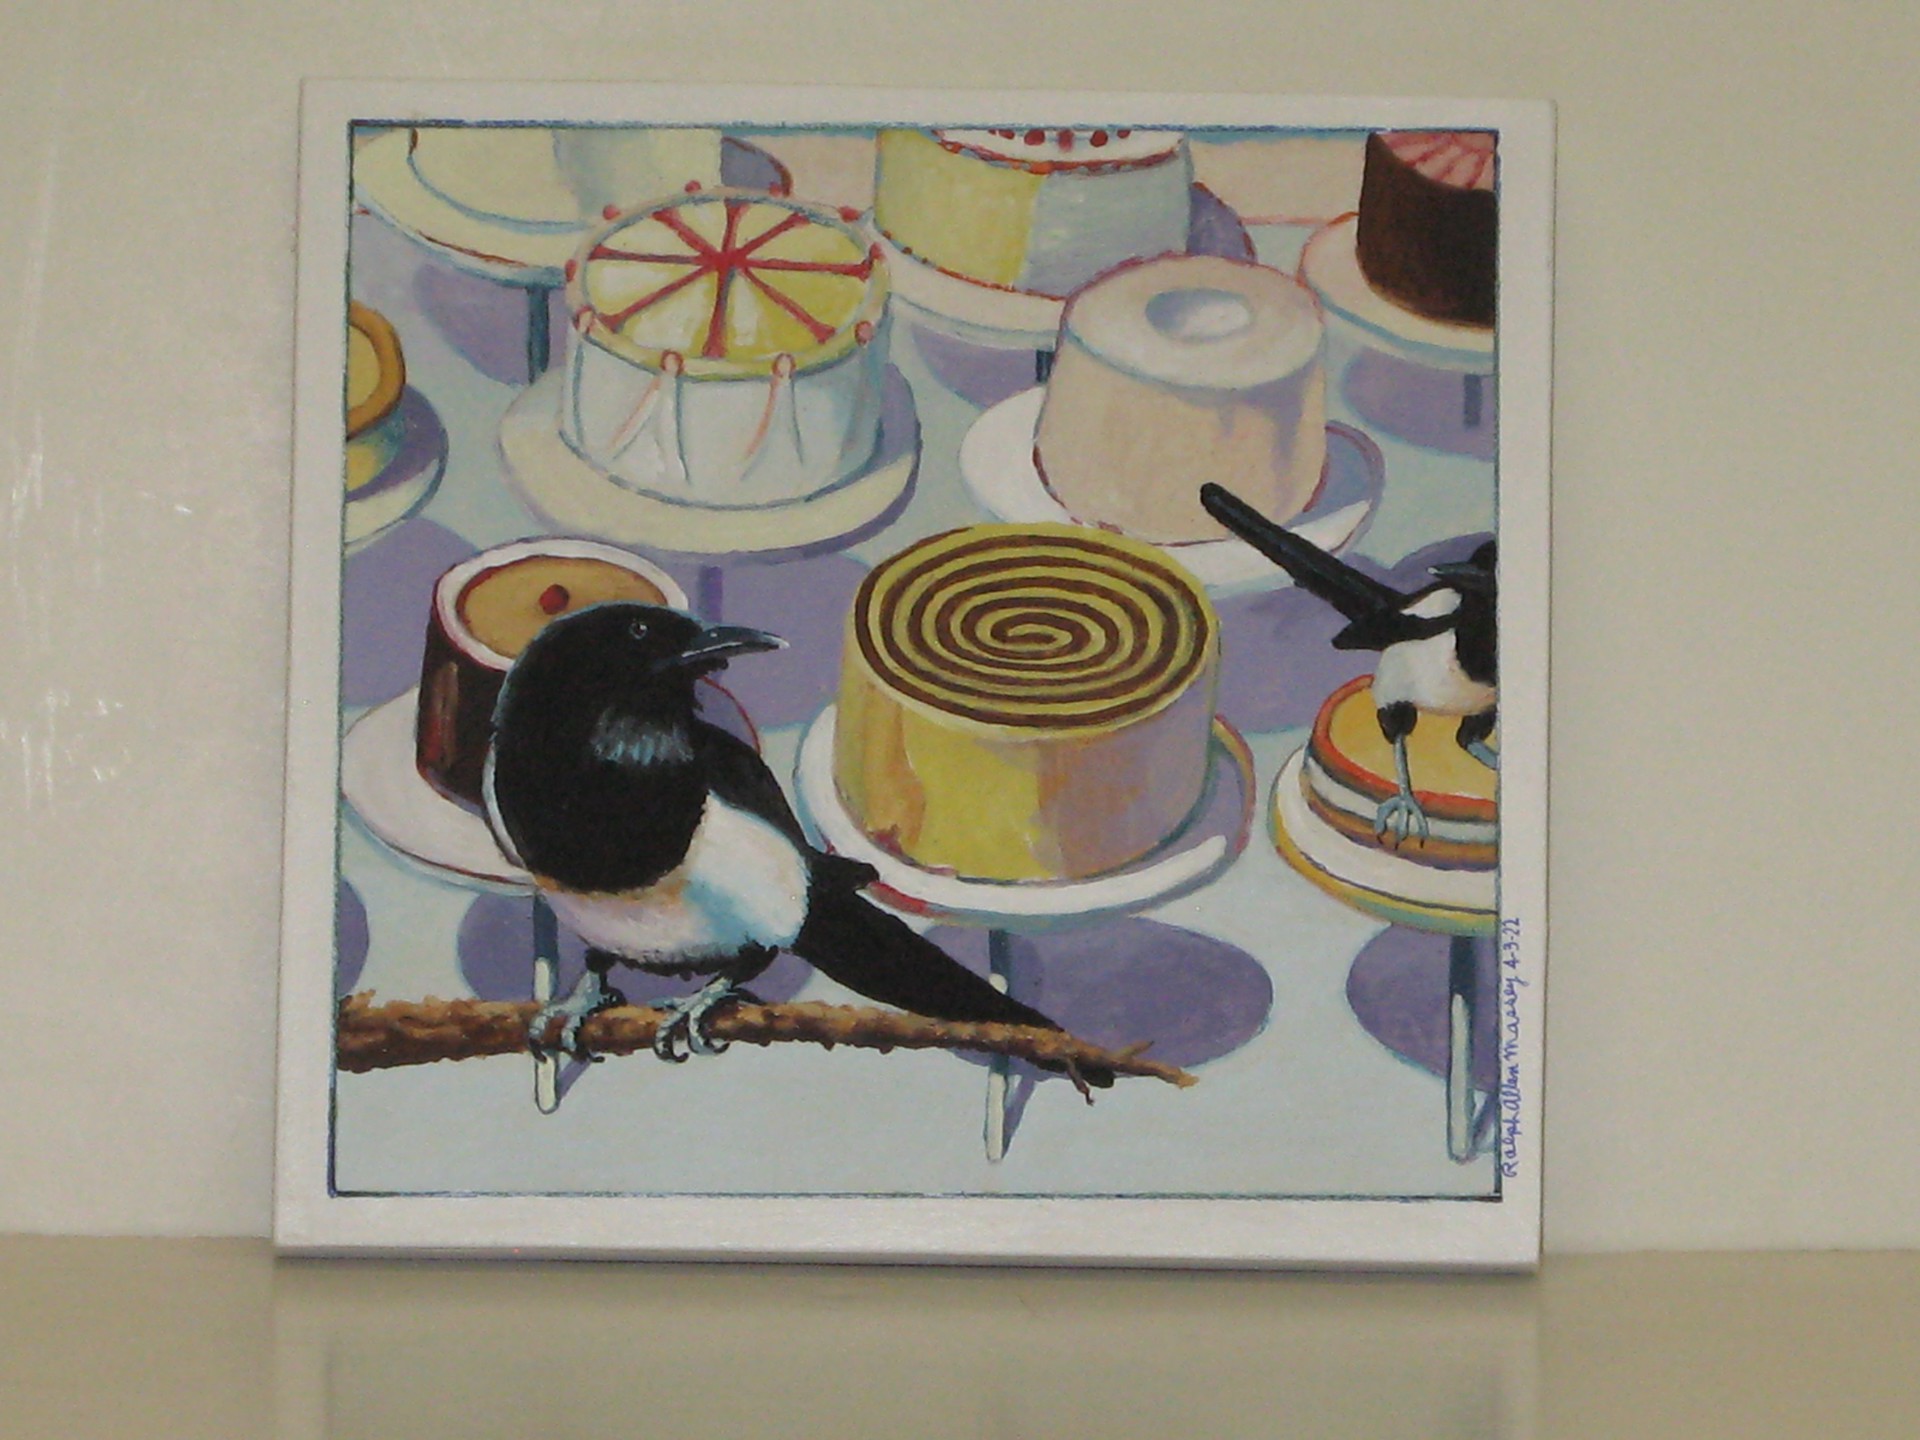 Magpies and Cakes offset #1 by Ralph Allen Massey